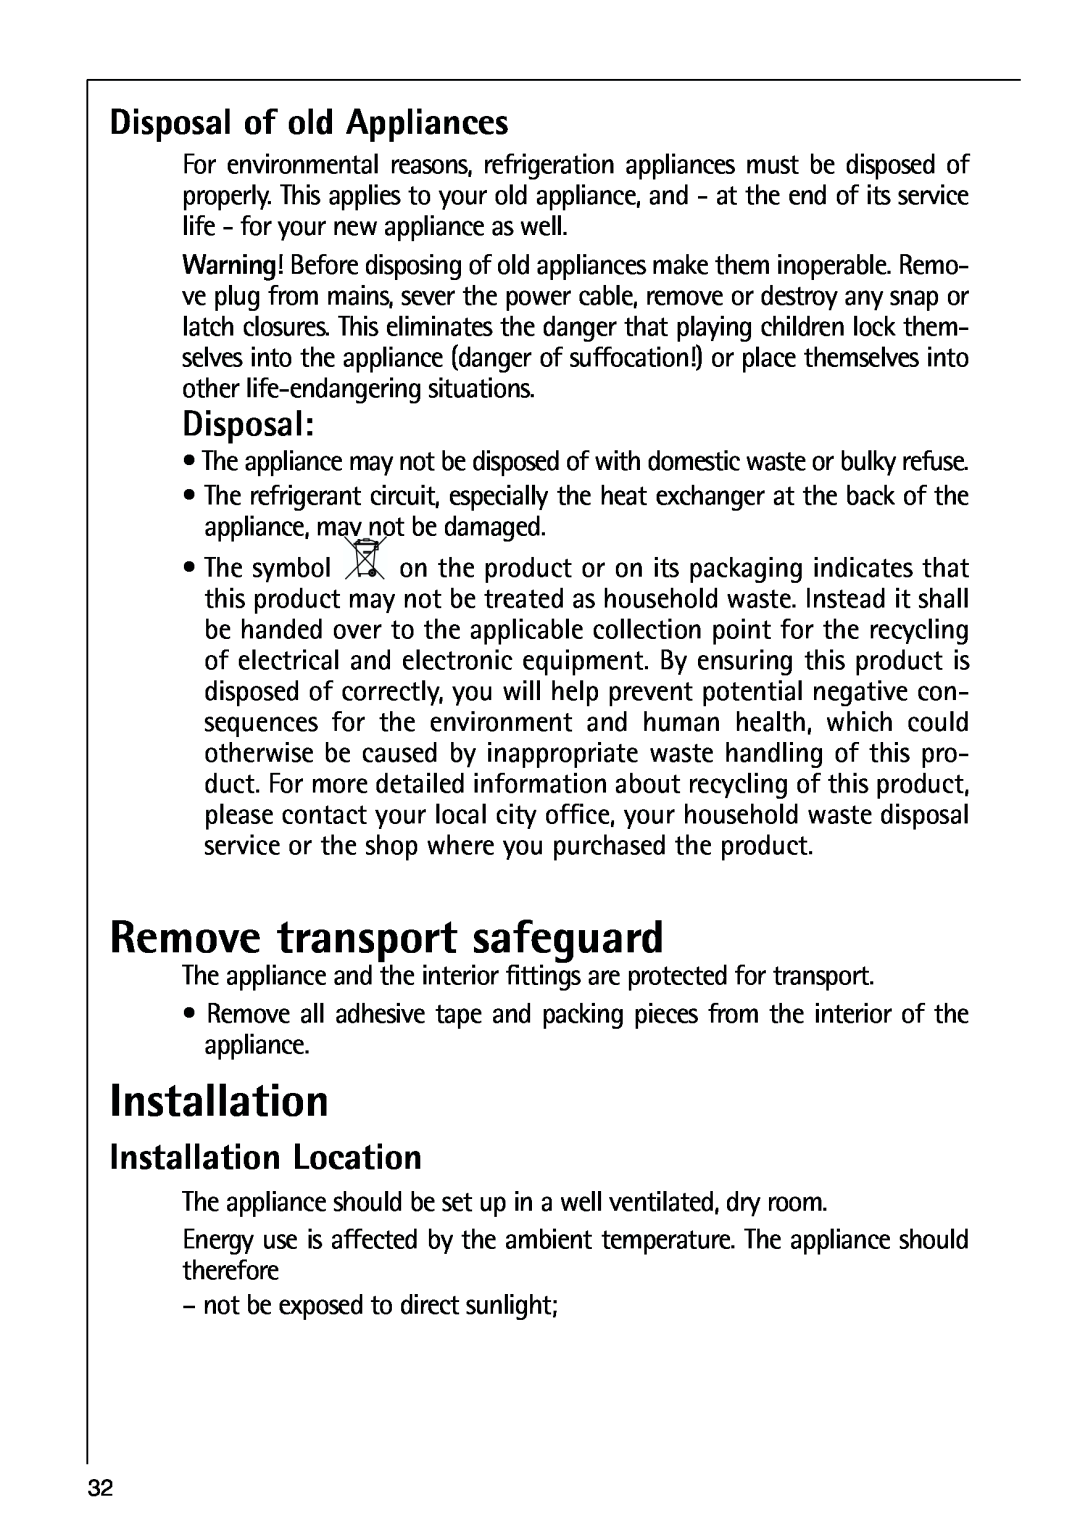 AEG 80318-5 KG user manual Remove transport safeguard, Disposal of old Appliances, Installation Location 